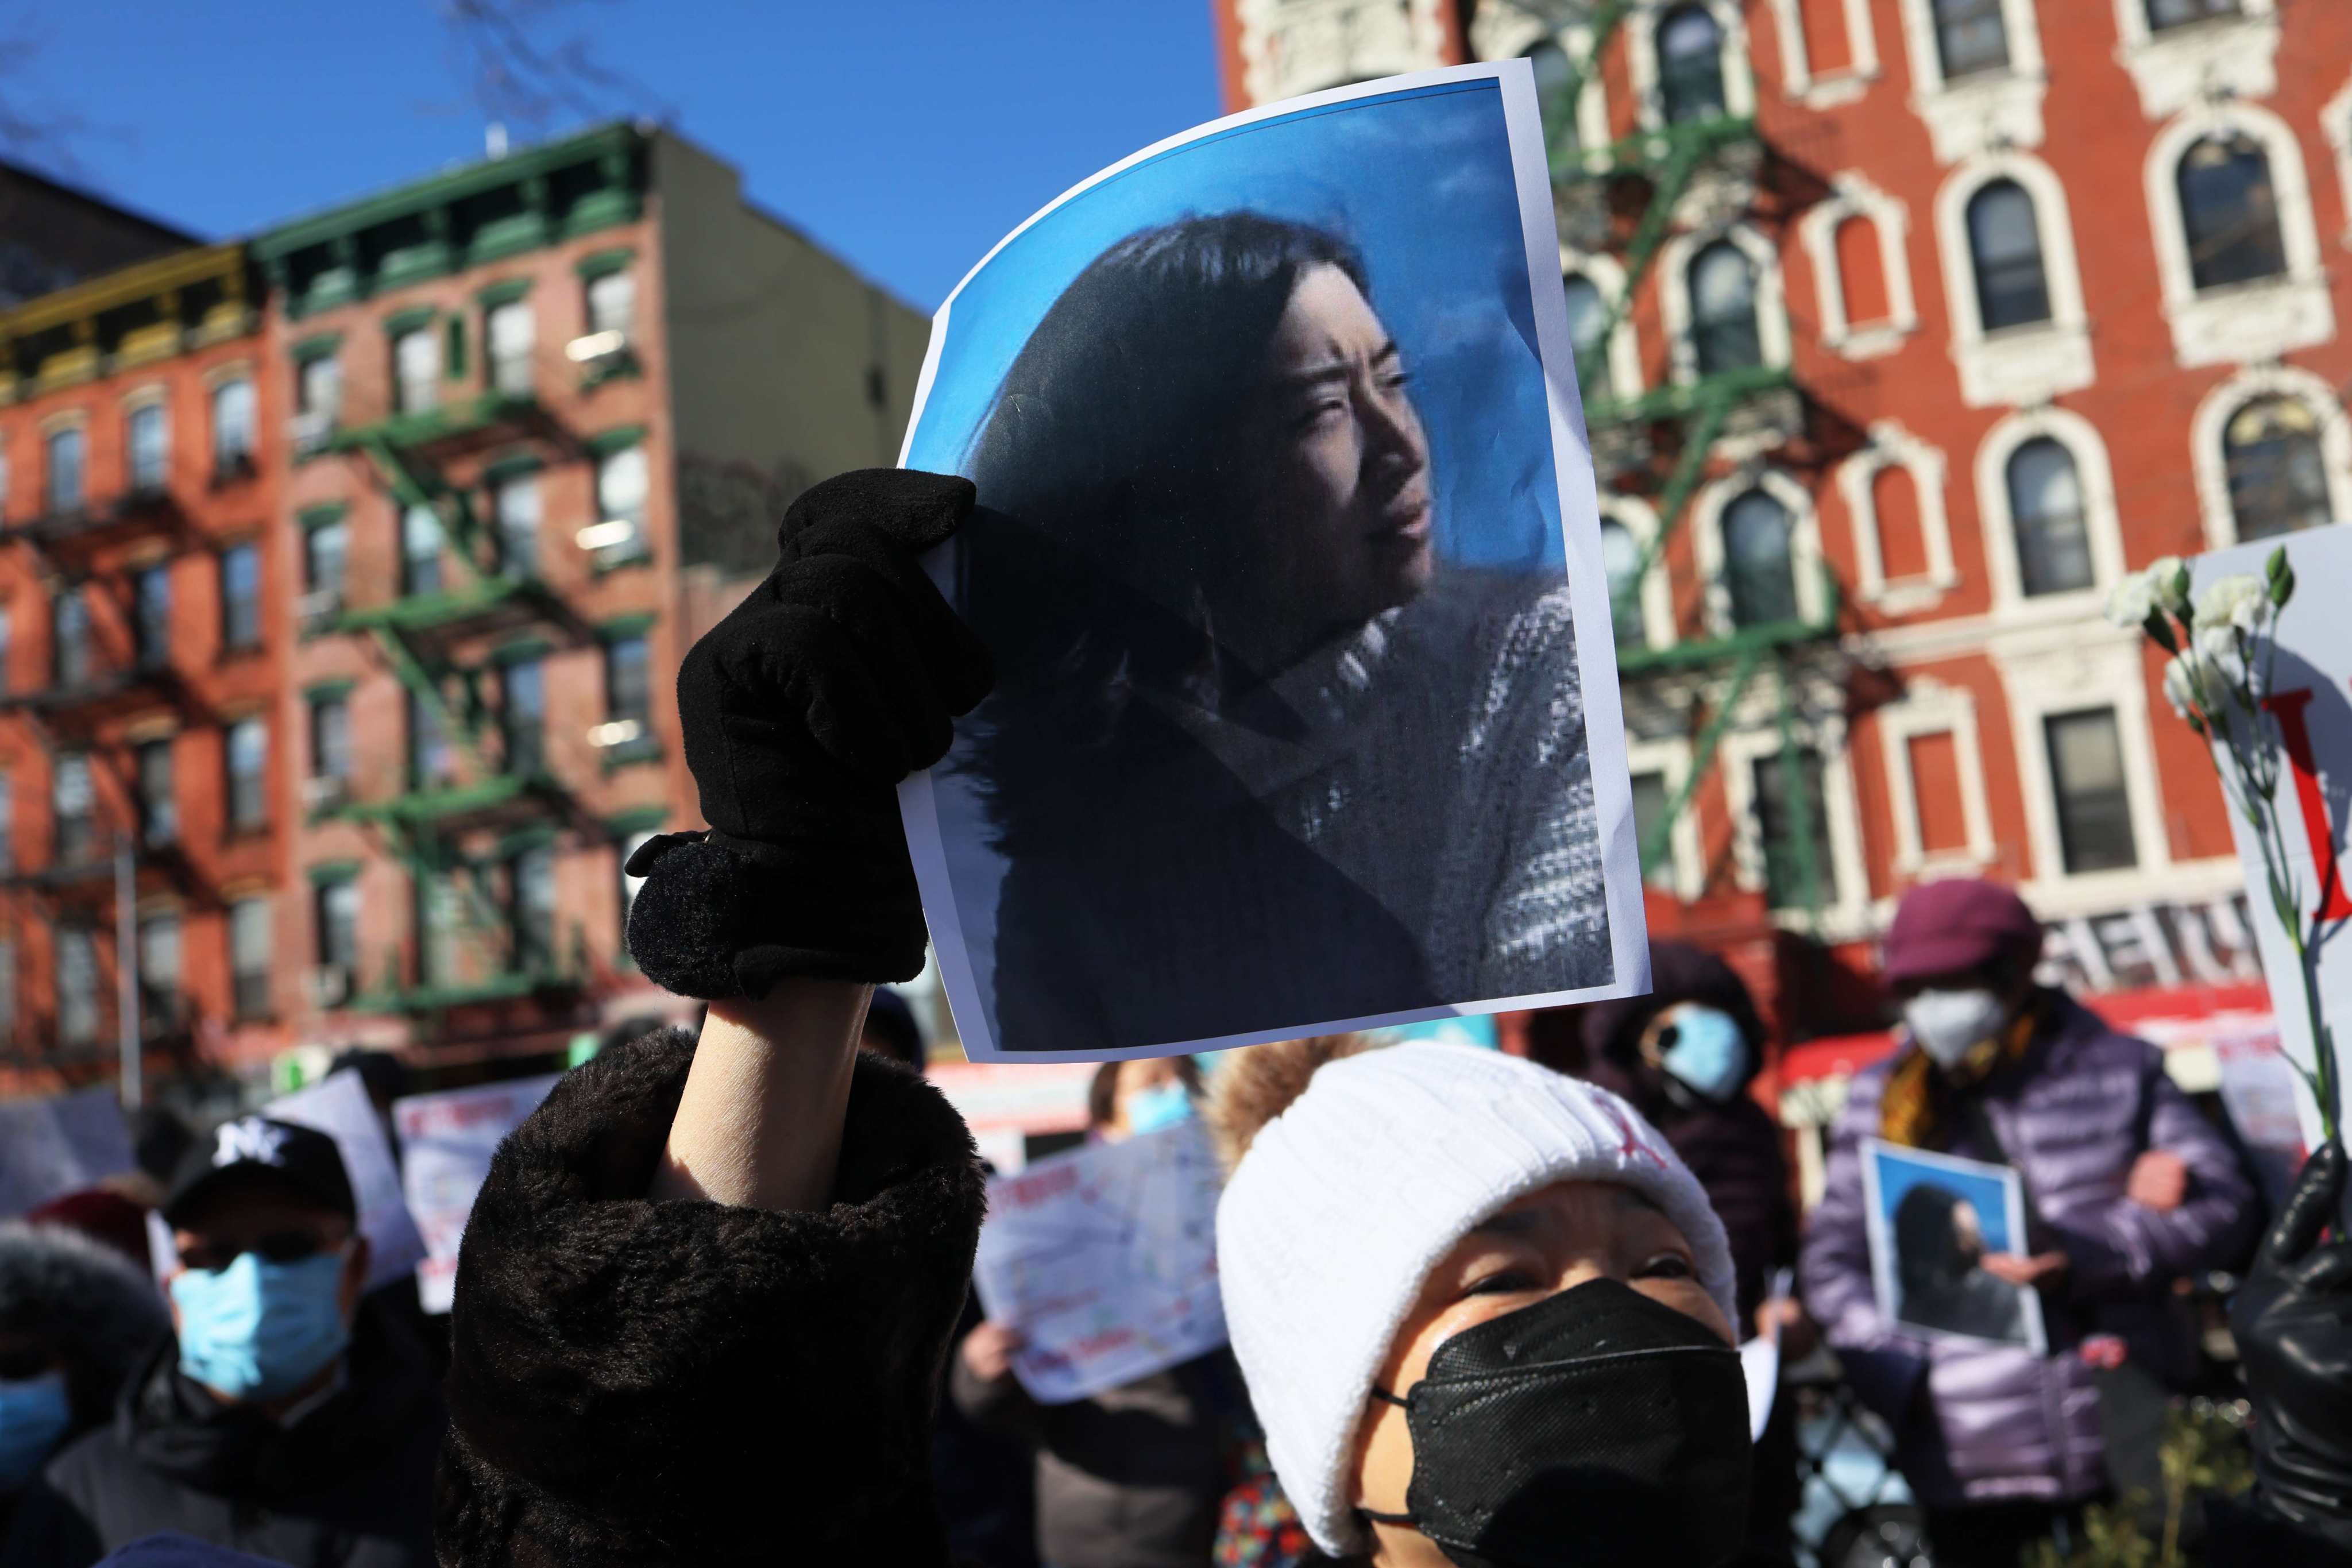 NEW YORK, NEW YORK - FEBRUARY 14: A person holds a photo of Christina Yuna Lee as people gather for a rally protesting violence against Asian-Americans at Sara D. Roosevelt Park on February 14, 2022 in the Chinatown neighborhood in New York City. Community members and leaders gathered to protest violence against the Asian-American community in the wake of the murder of 35-year old Christina Yuna Lee. Lee was stabbed to death in her apartment early Sunday morning by a man who followed her into her building. Attacks on Asian-Americans have been on the rise amid the coronavirus (COVID-19) pandemic.   Michael M. Santiago/Getty Images/AFP
== FOR NEWSPAPERS, INTERNET, TELCOS & TELEVISION USE ONLY ==